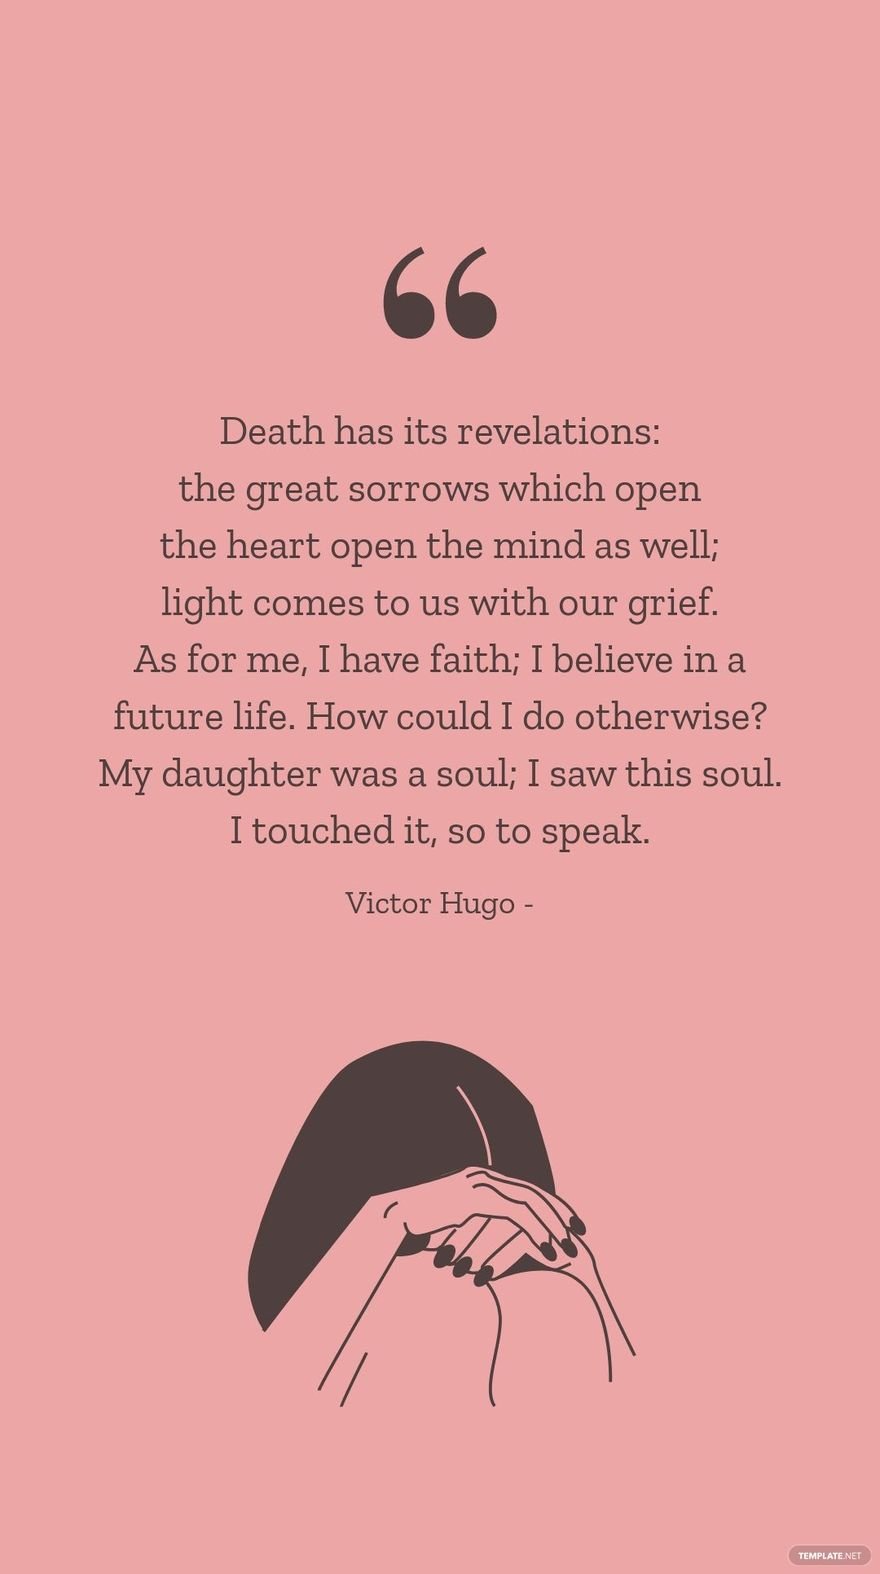 Free VICTOR HUGO - Death has its revelations: the great sorrows